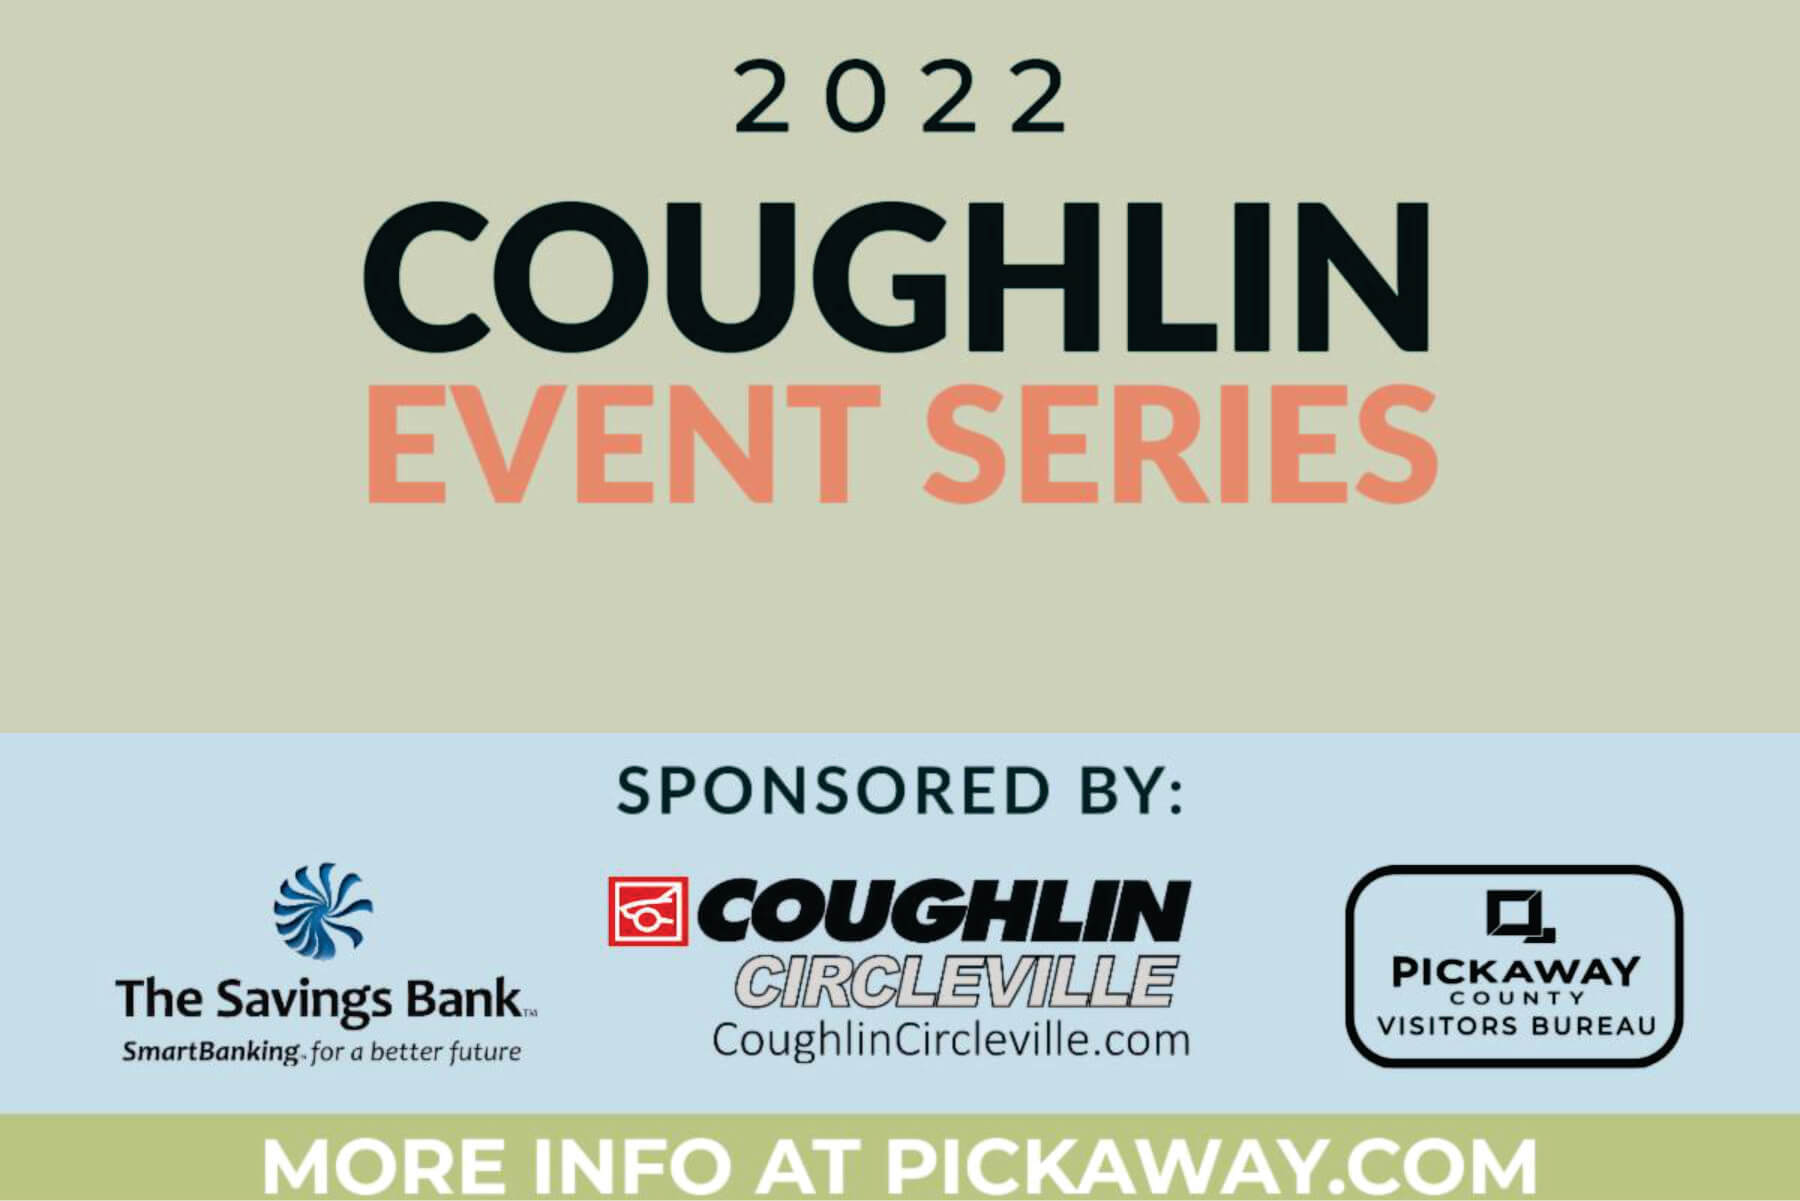 2022 Coughlin Event Series Pickaway County, Ohio